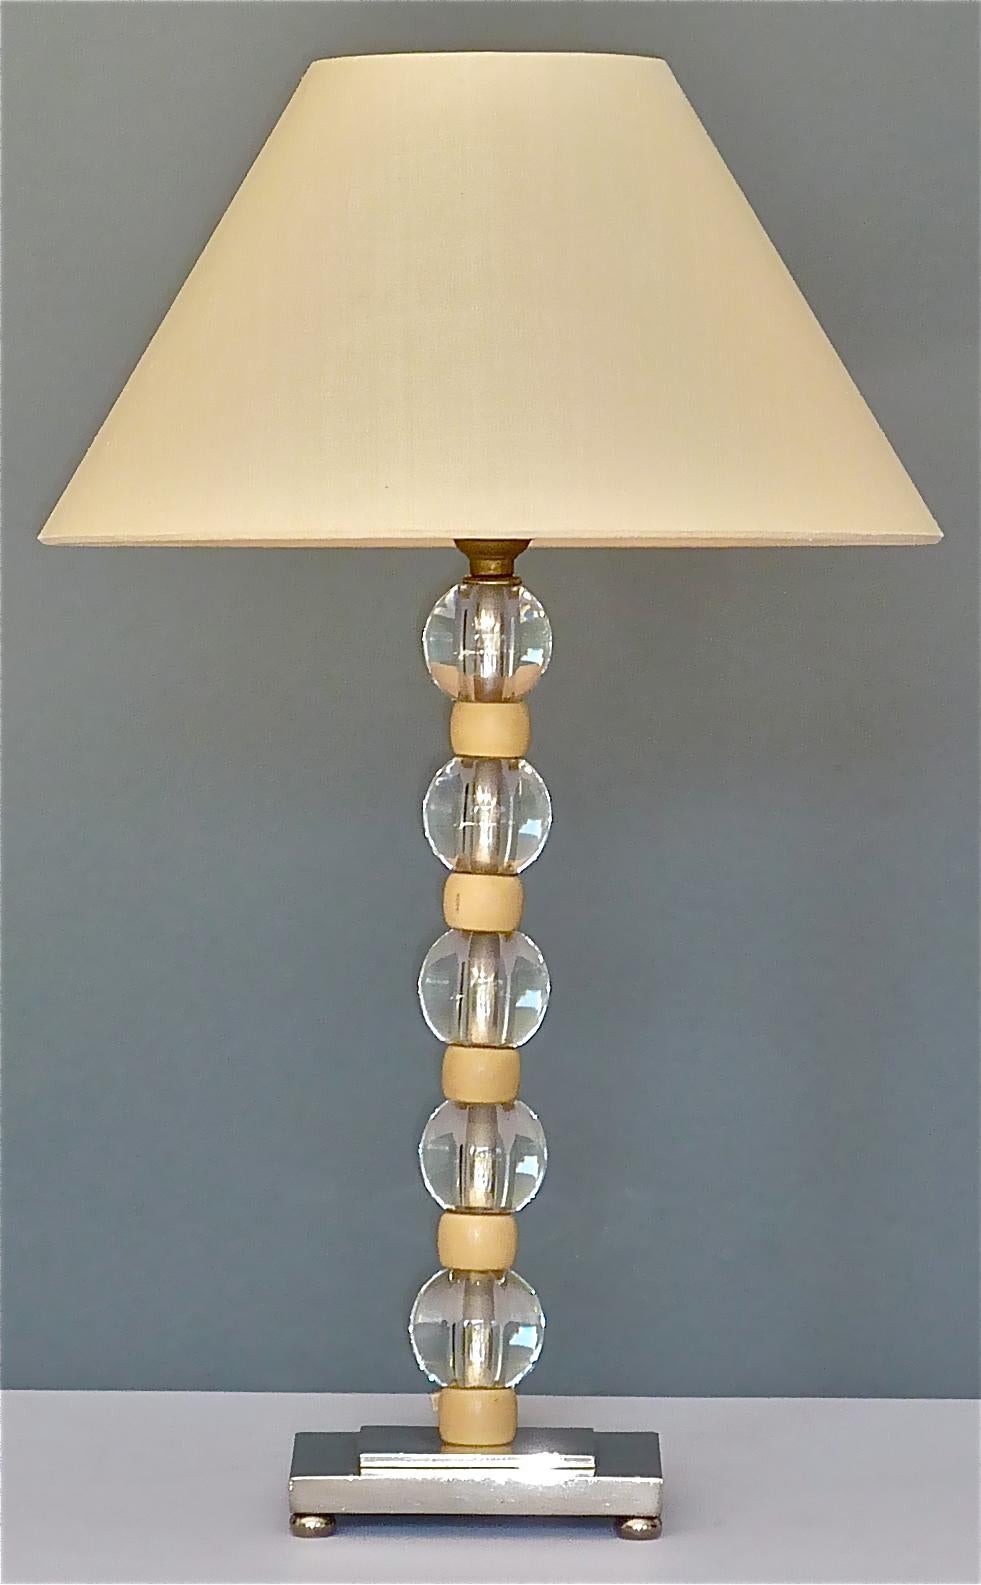 Beautiful French modernist Art Deco table lamp which has been designed and executed in the 1920s-1930s in France and which is attributed to or very much in the style of the wonderful designs by Jacques Adnet in cooperation with Baccarat or Maison